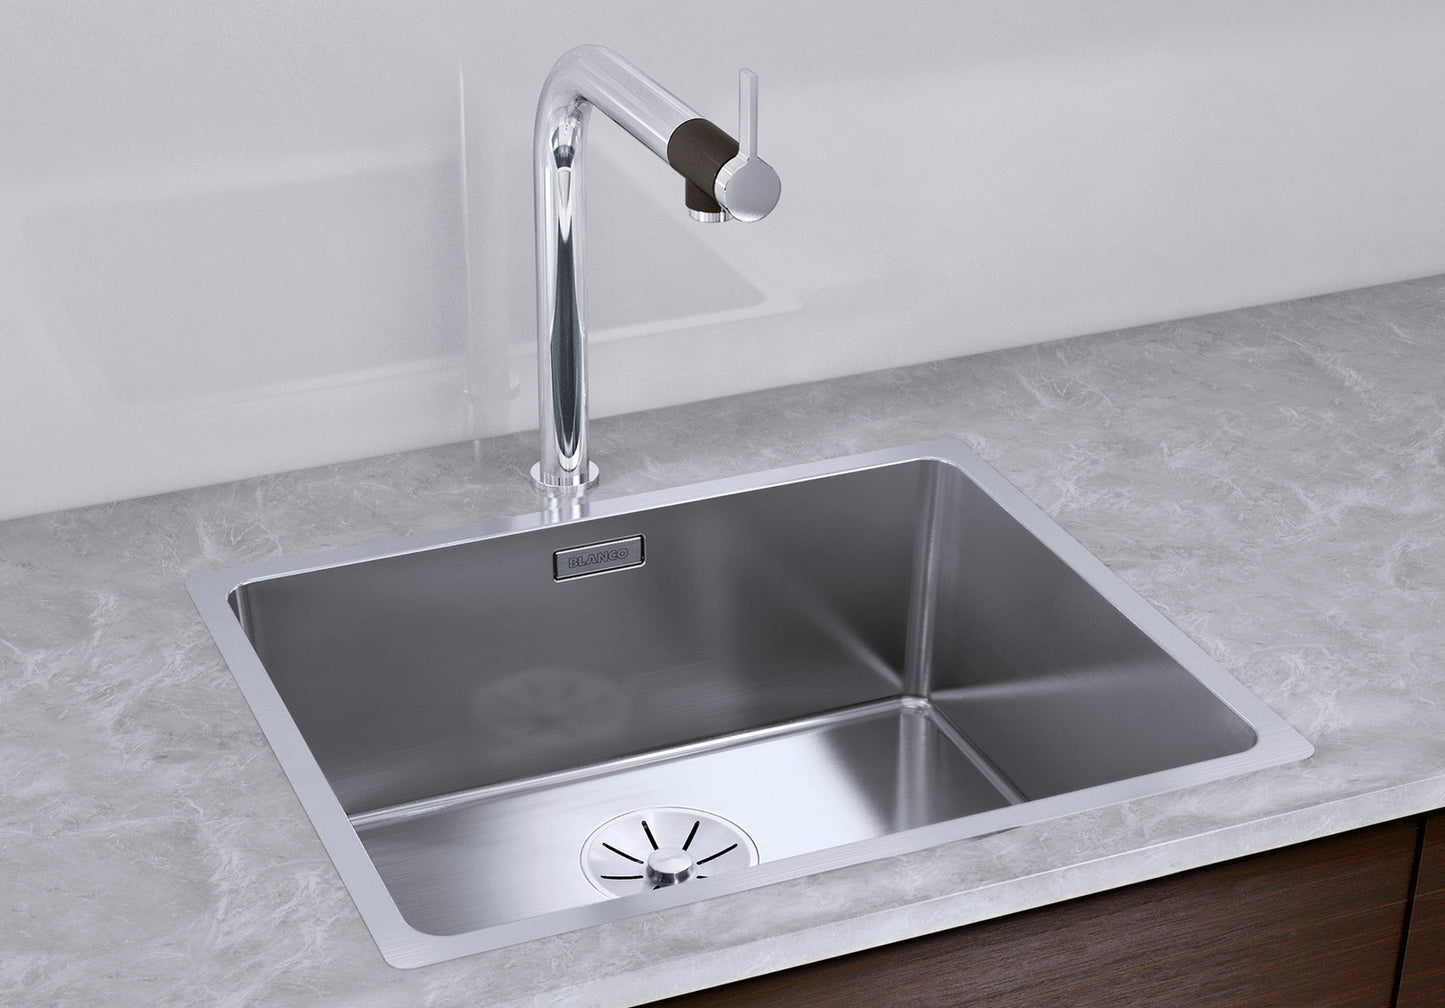 BLANCO Andano 500mm Stainless Steel Sink 德國製造直角方形不銹鋼星盆 | Made in Germany |